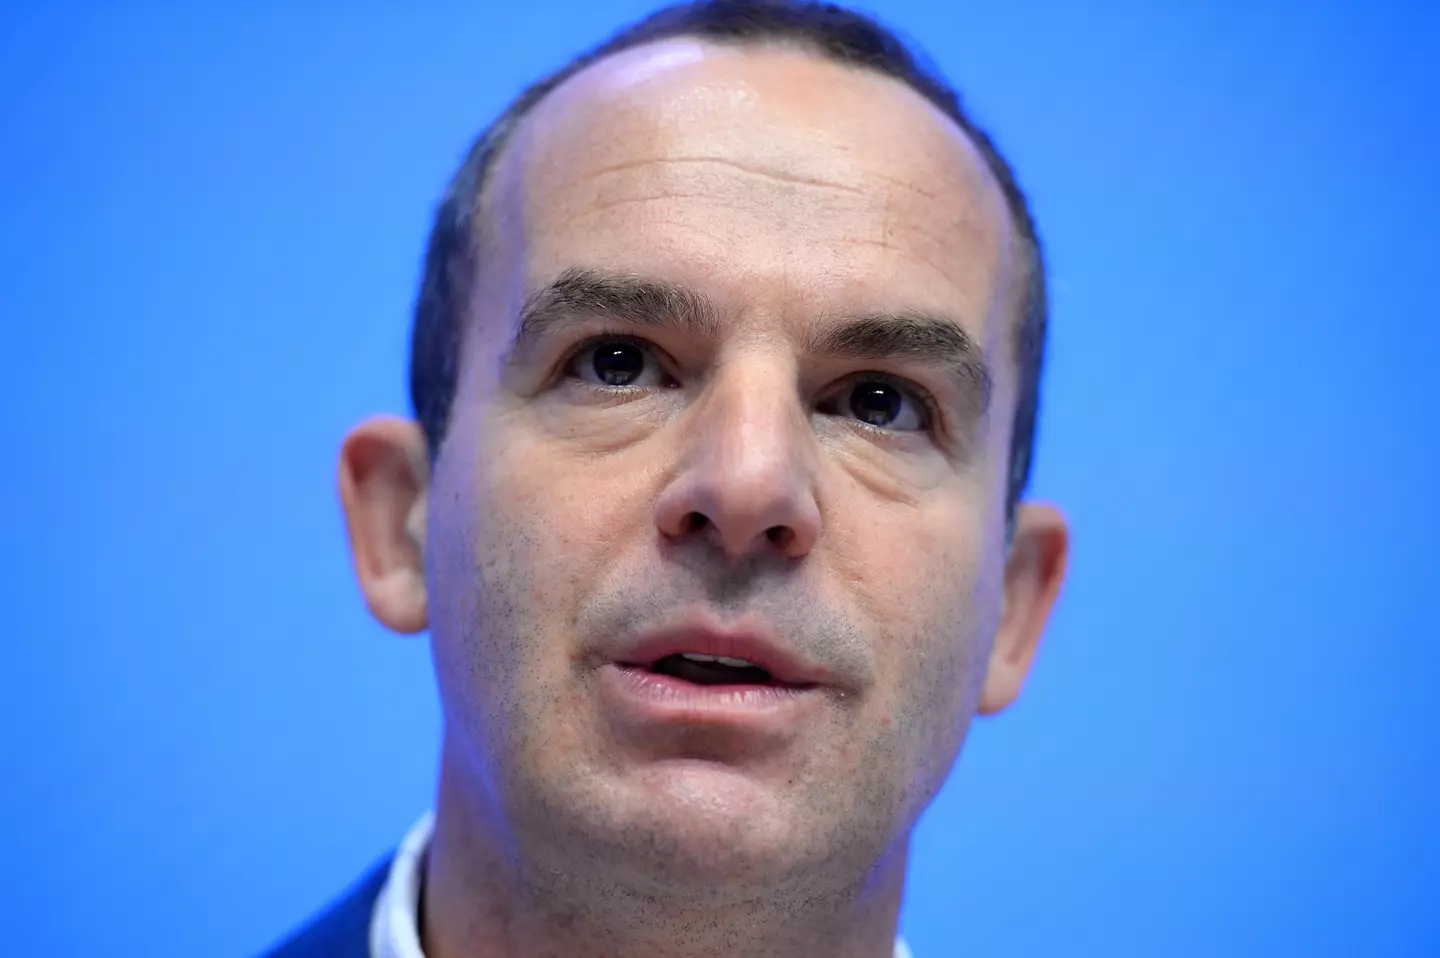 Martin Lewis claims millions more will be pushed into energy poverty.